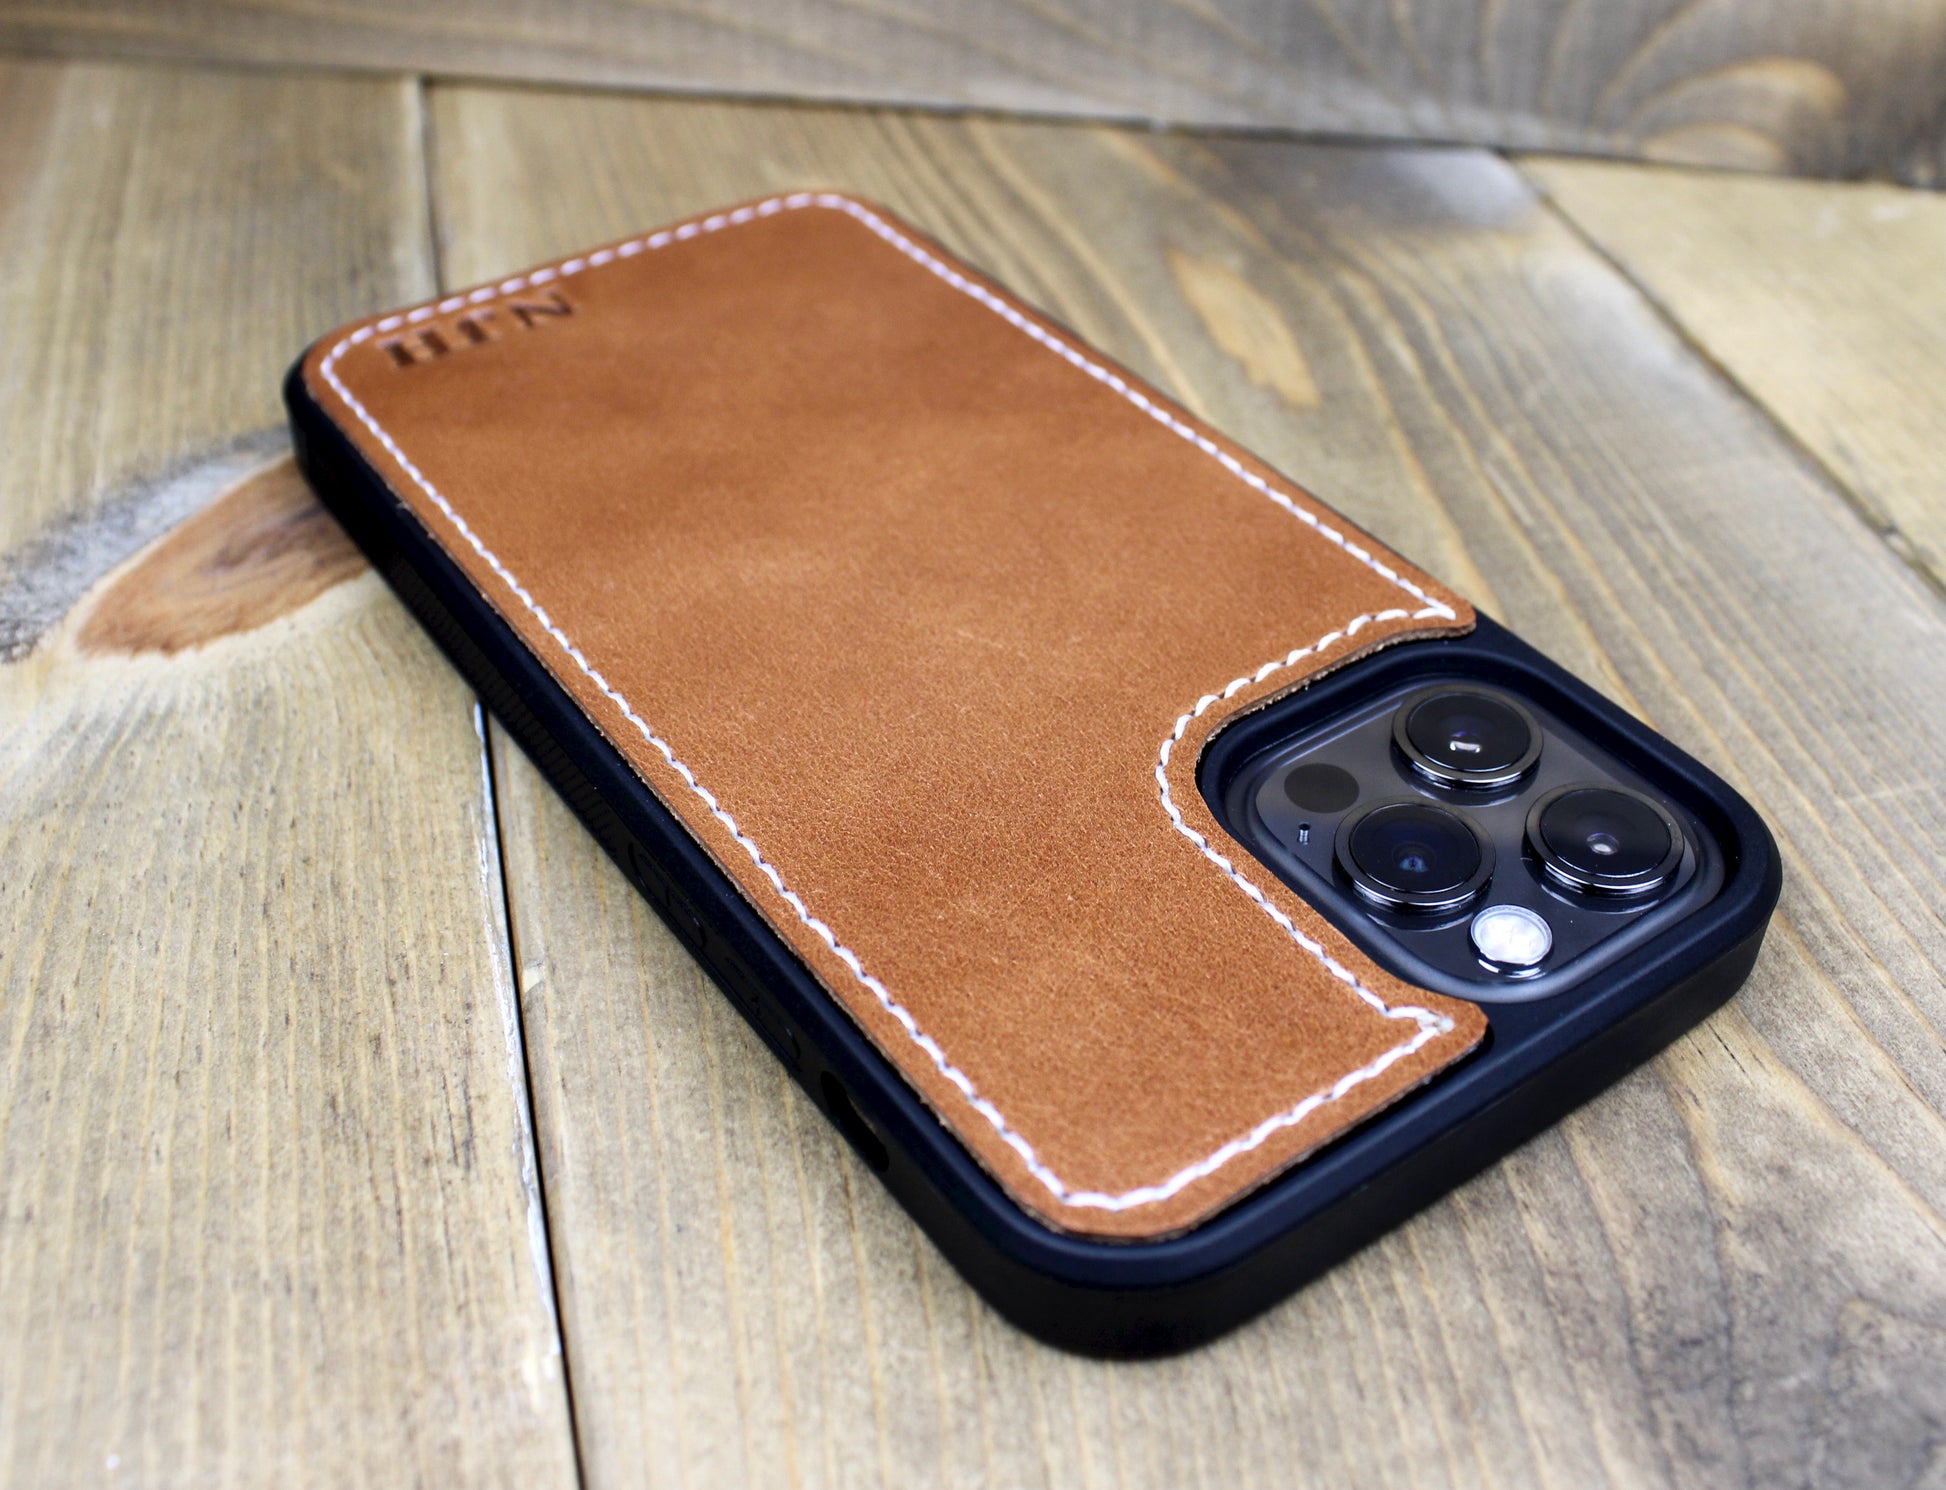 Iphone 13 Pro Max Brown Leather Case